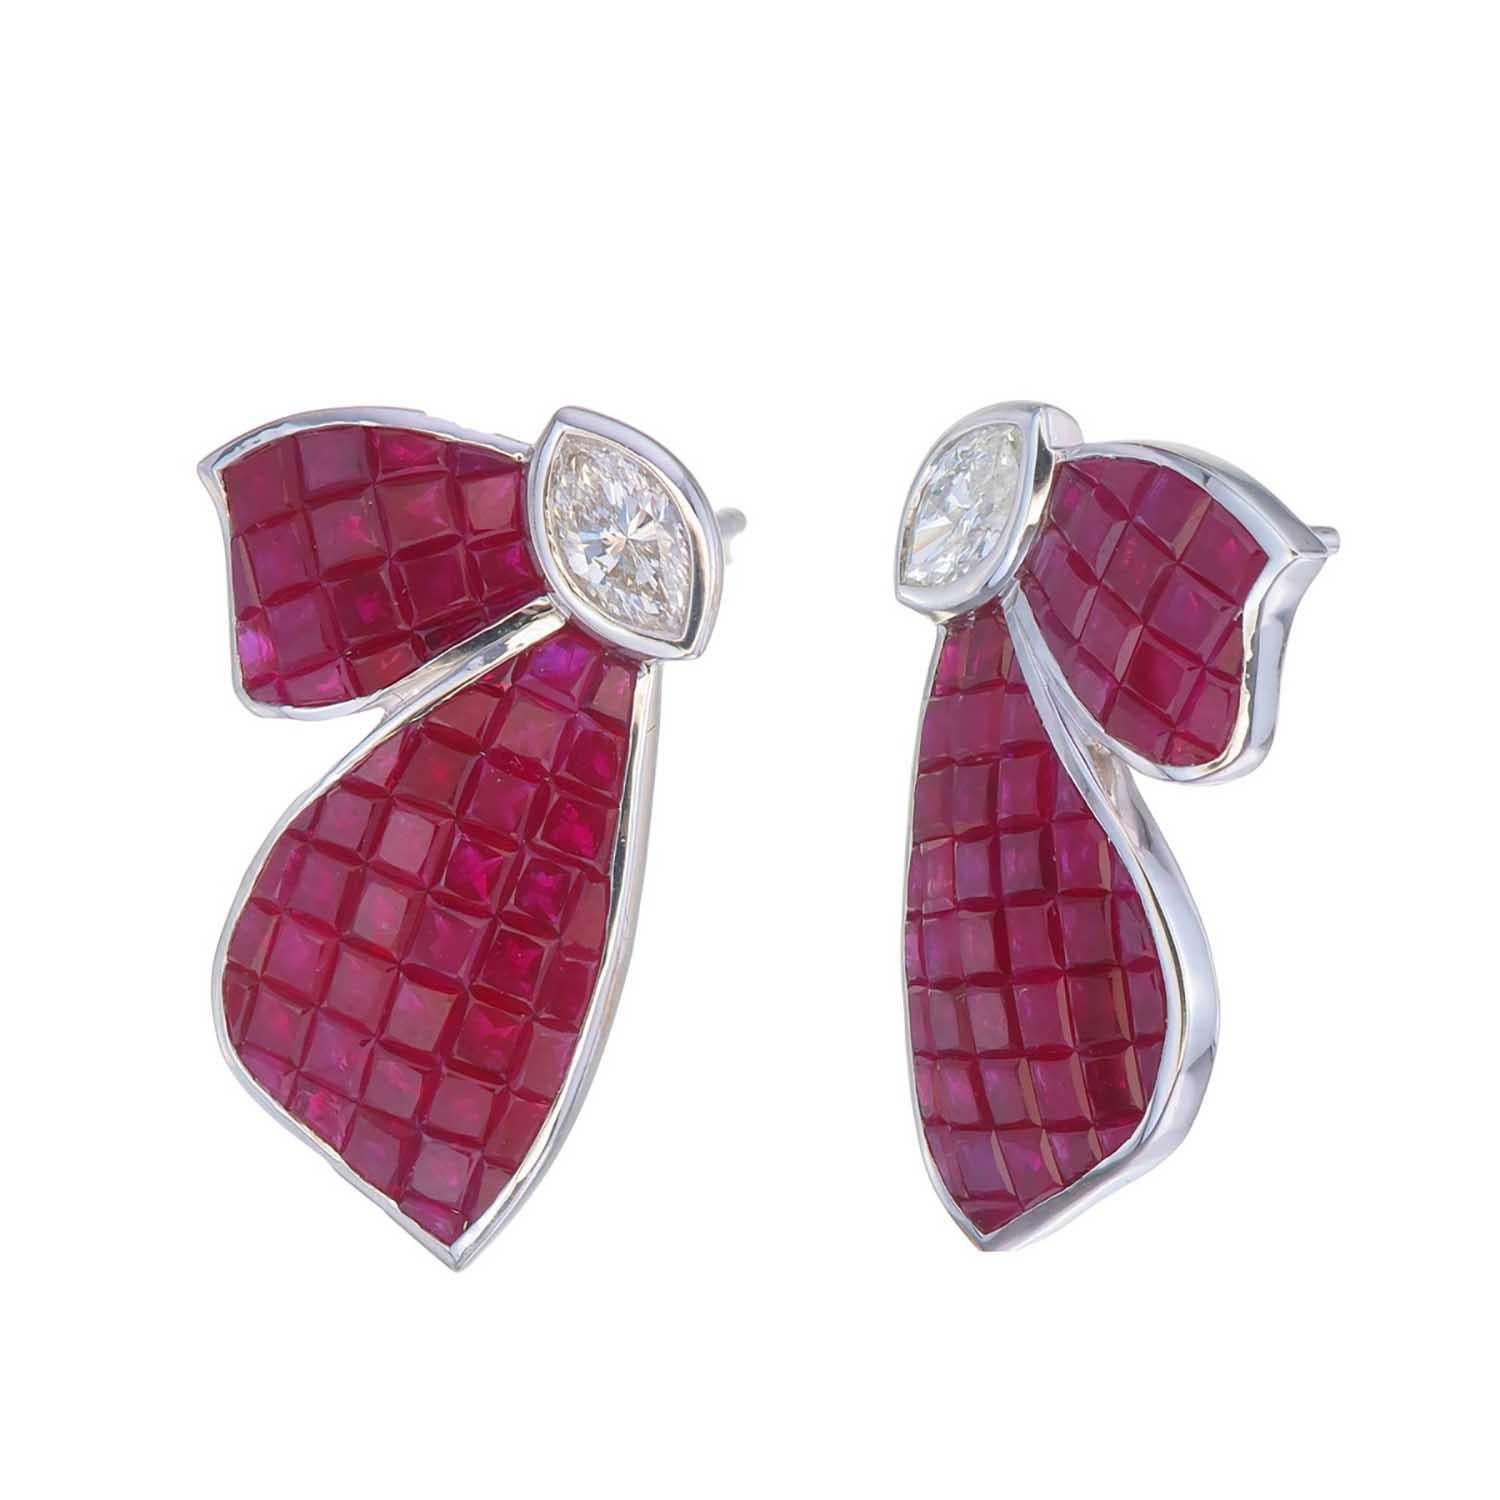 Invisible set ruby butterfly earrings are given form by precious ruby stones from East Africa and  Marquise diamond
A tribute to  feminine beauty embodied in the most delicate and mesmerizing creature in nature, the butterfly.
This collection